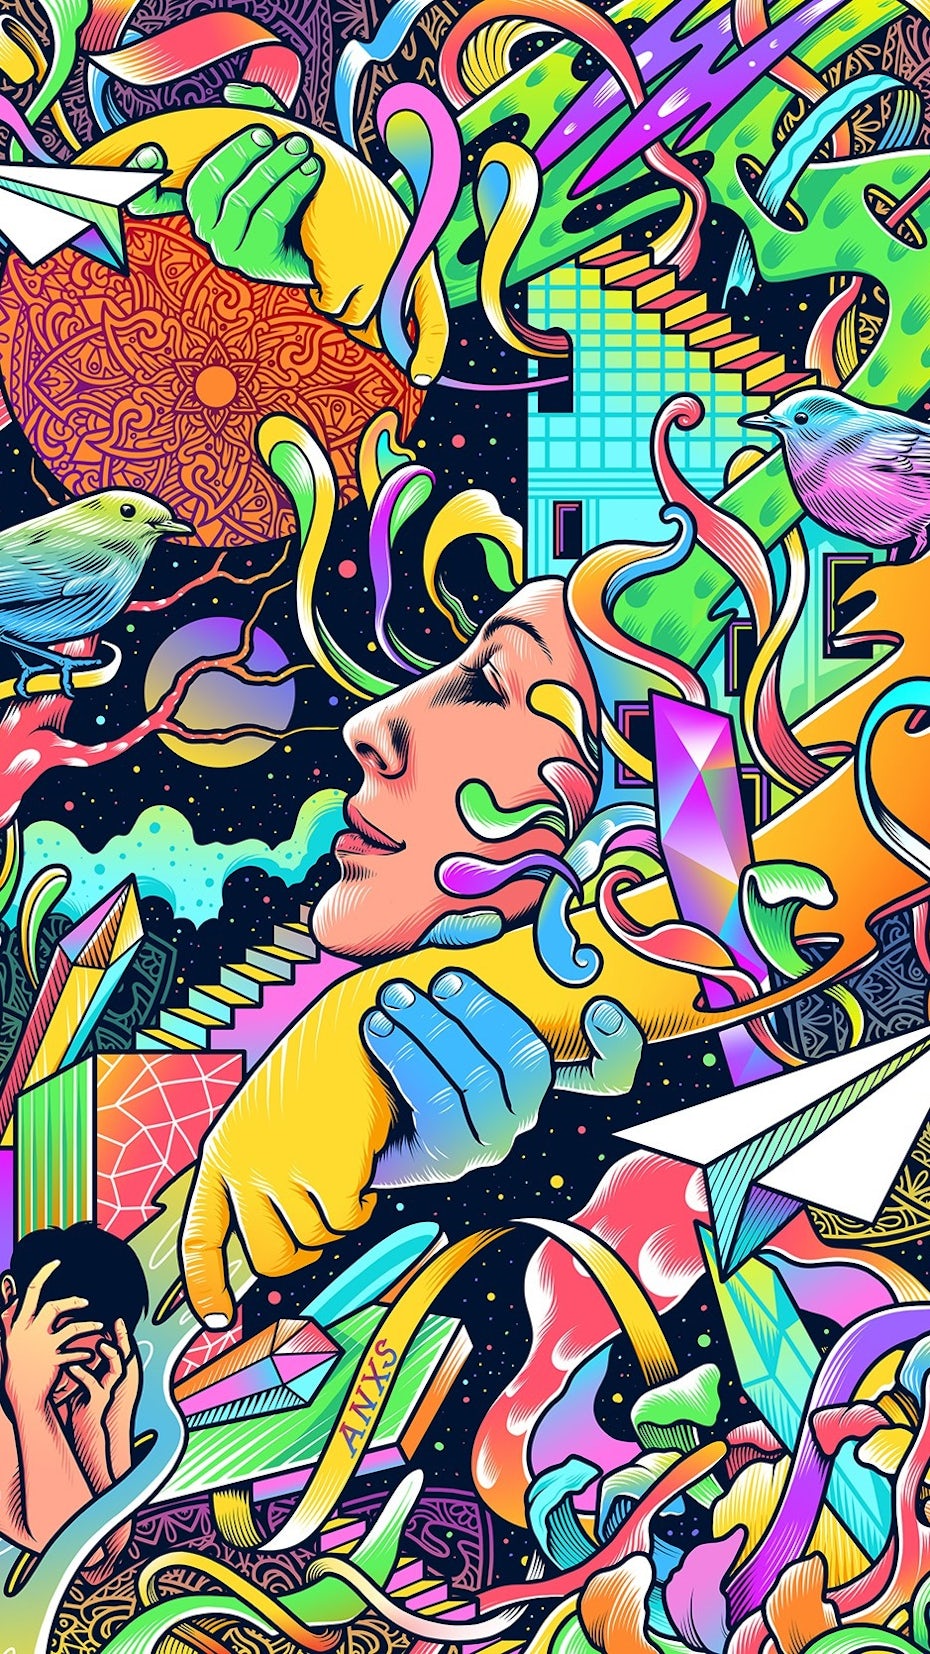 Colorful and abstract psychedelic poster illustration